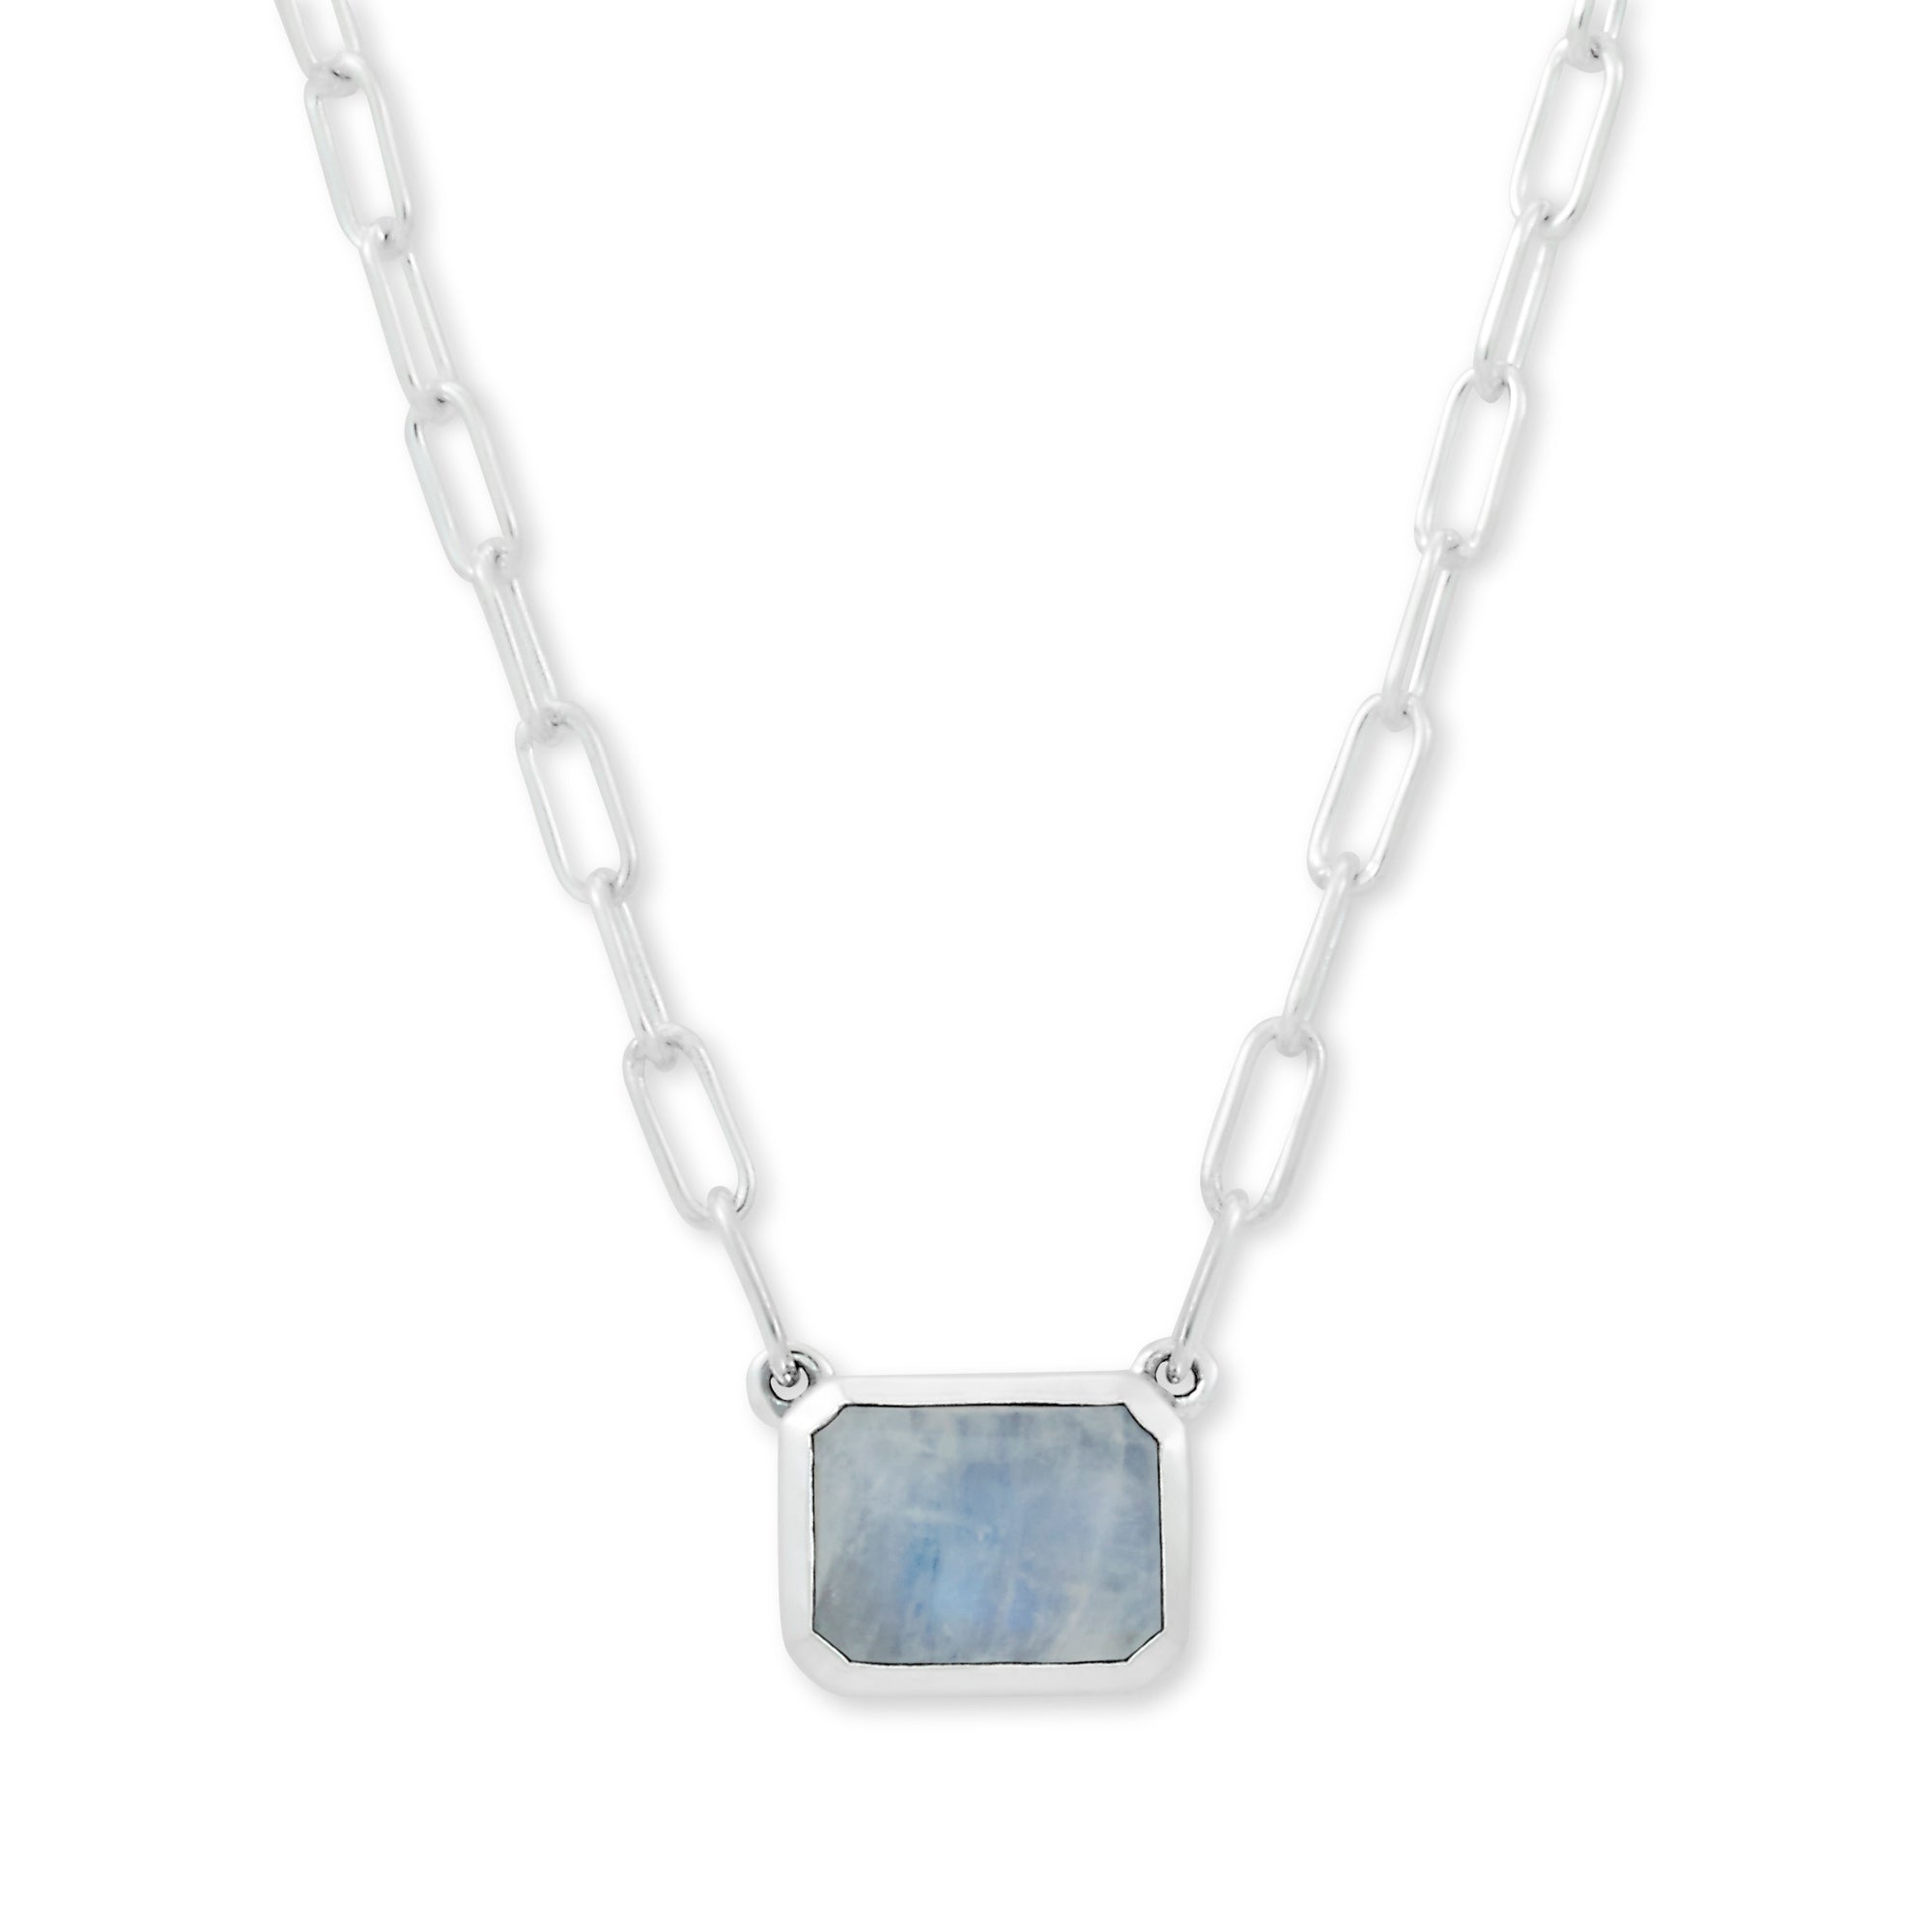 Rainbow Moonstone Eirini Necklace available at Talisman Collection Fine Jewelers in El Dorado Hills, CA and online. Specs: Emerald-cut rainbow moonstone solitaire necklace is set in sterling silver and is perfect for every day. Moonstone measures 7x9mm. 